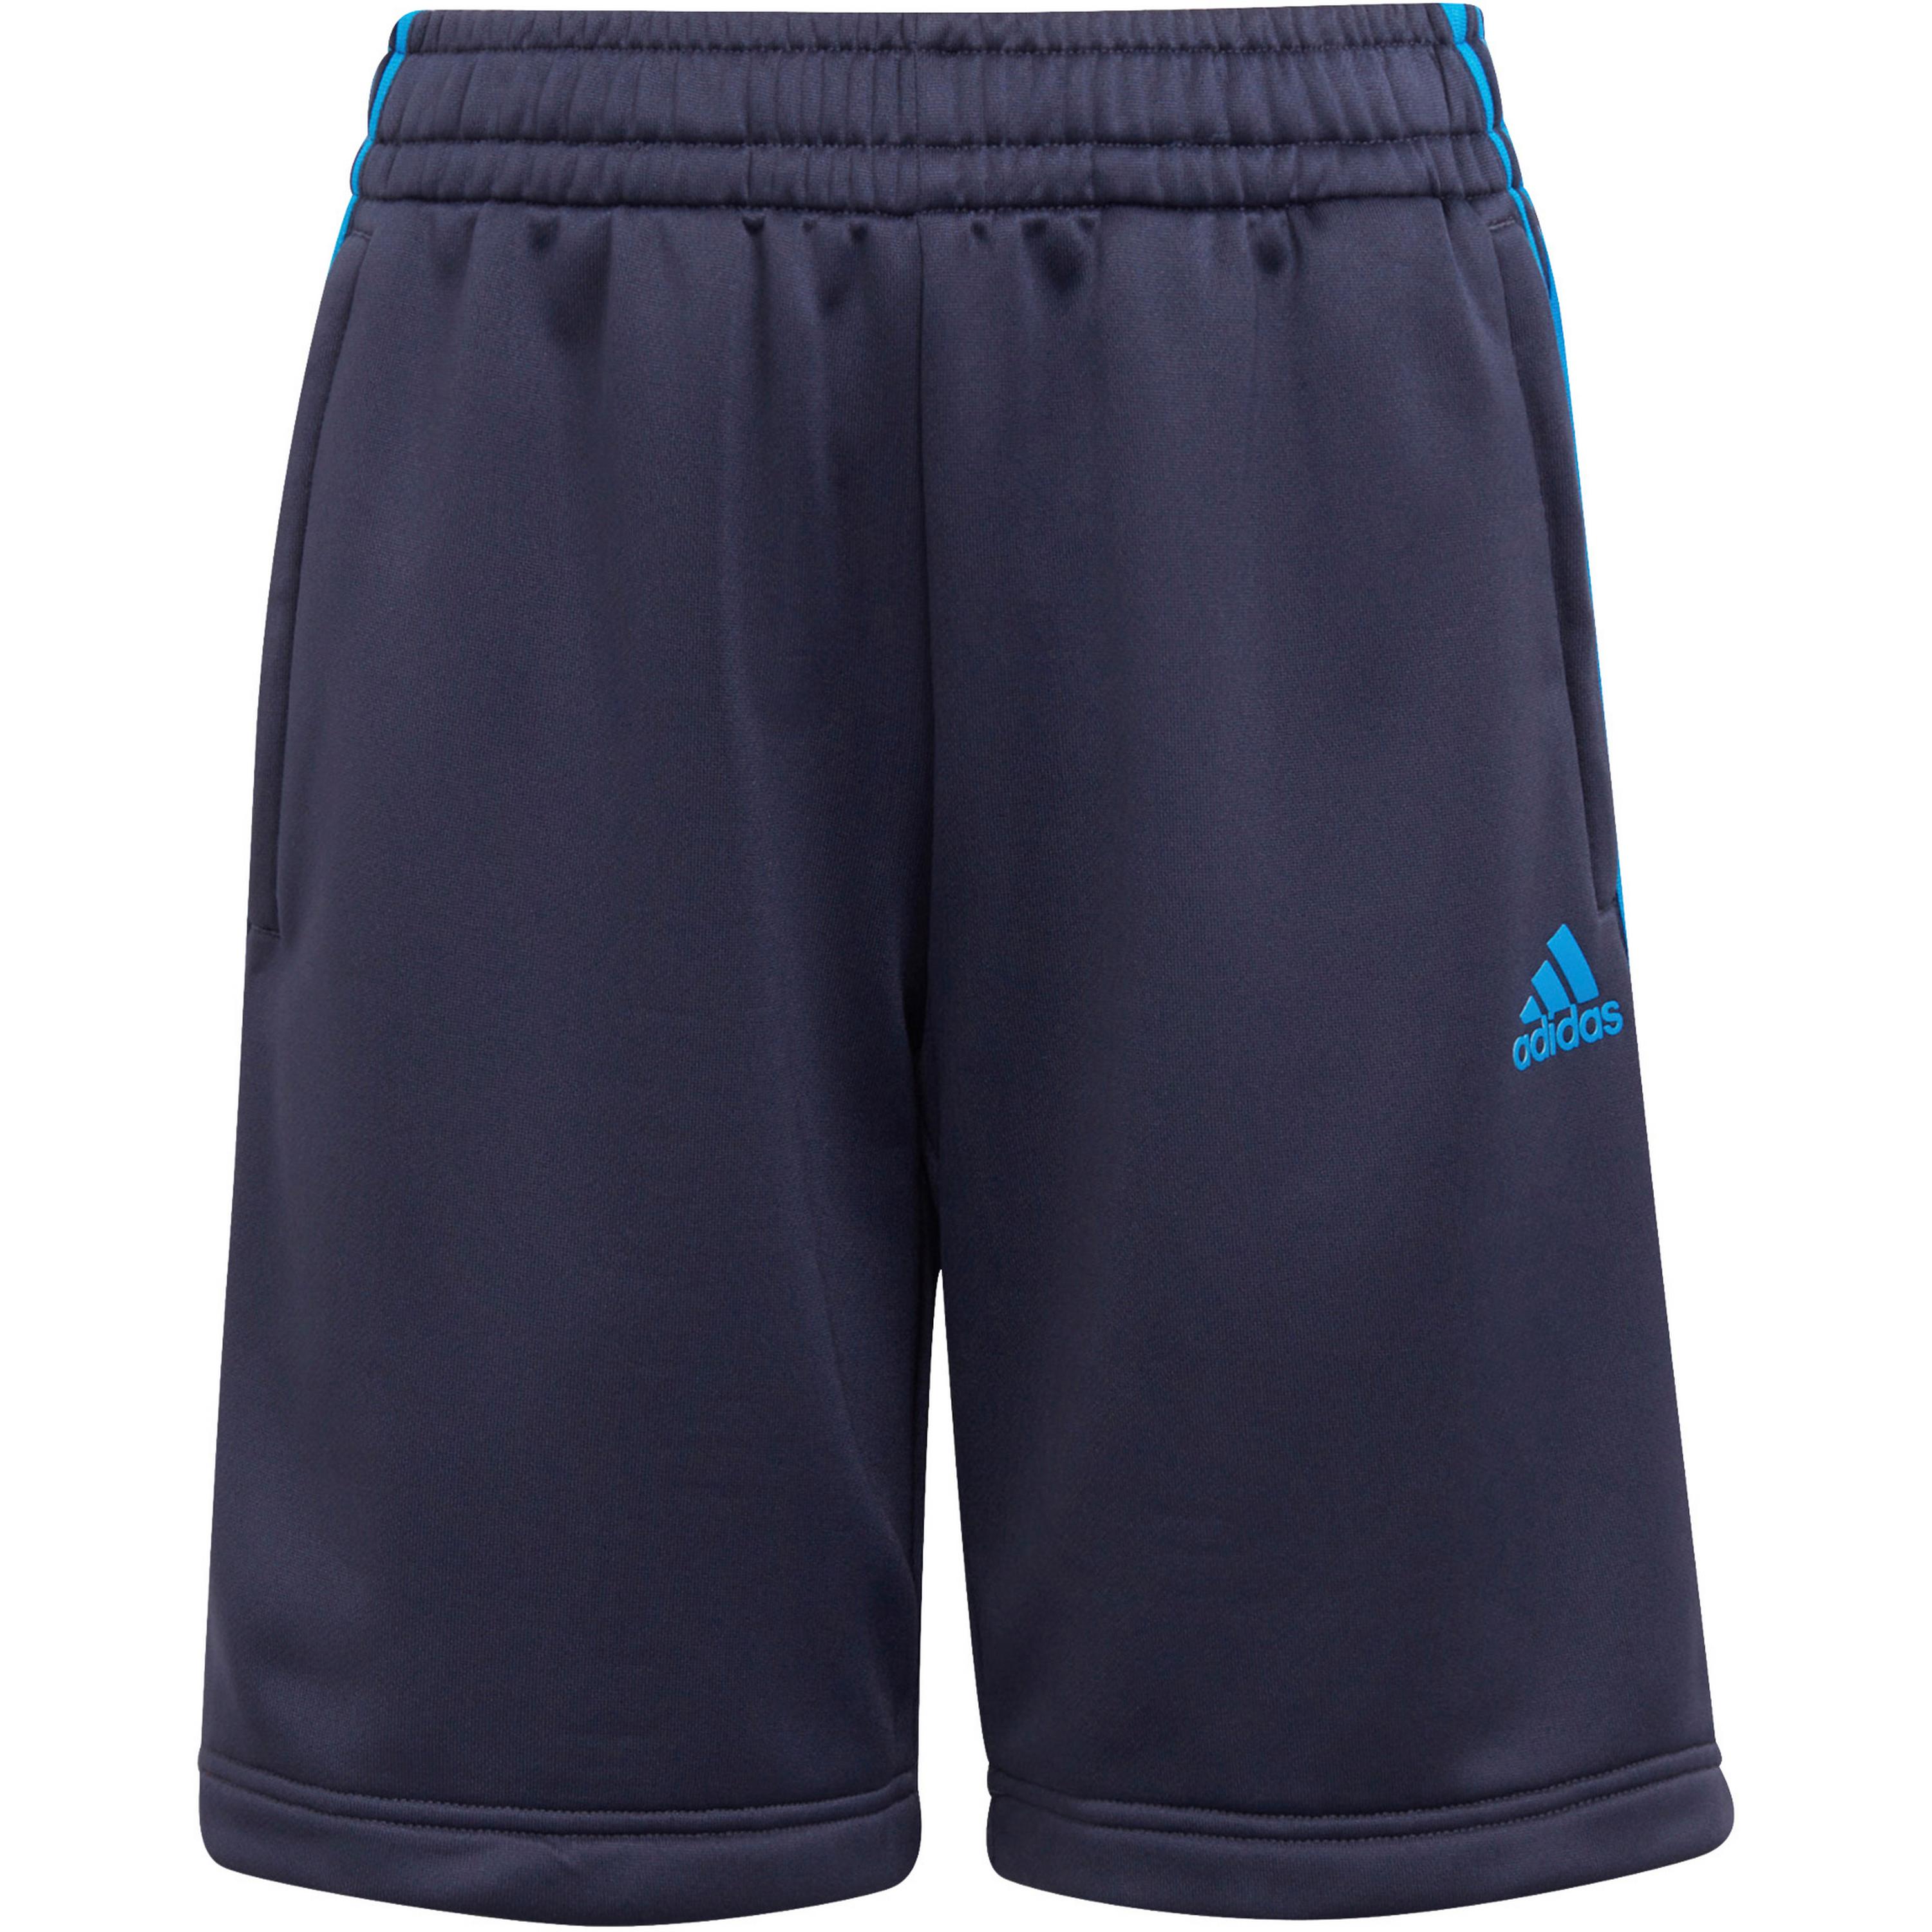 Image of adidas 3-STRIPES SPORT ICONS AEROREADY Funktionsshorts Jungen